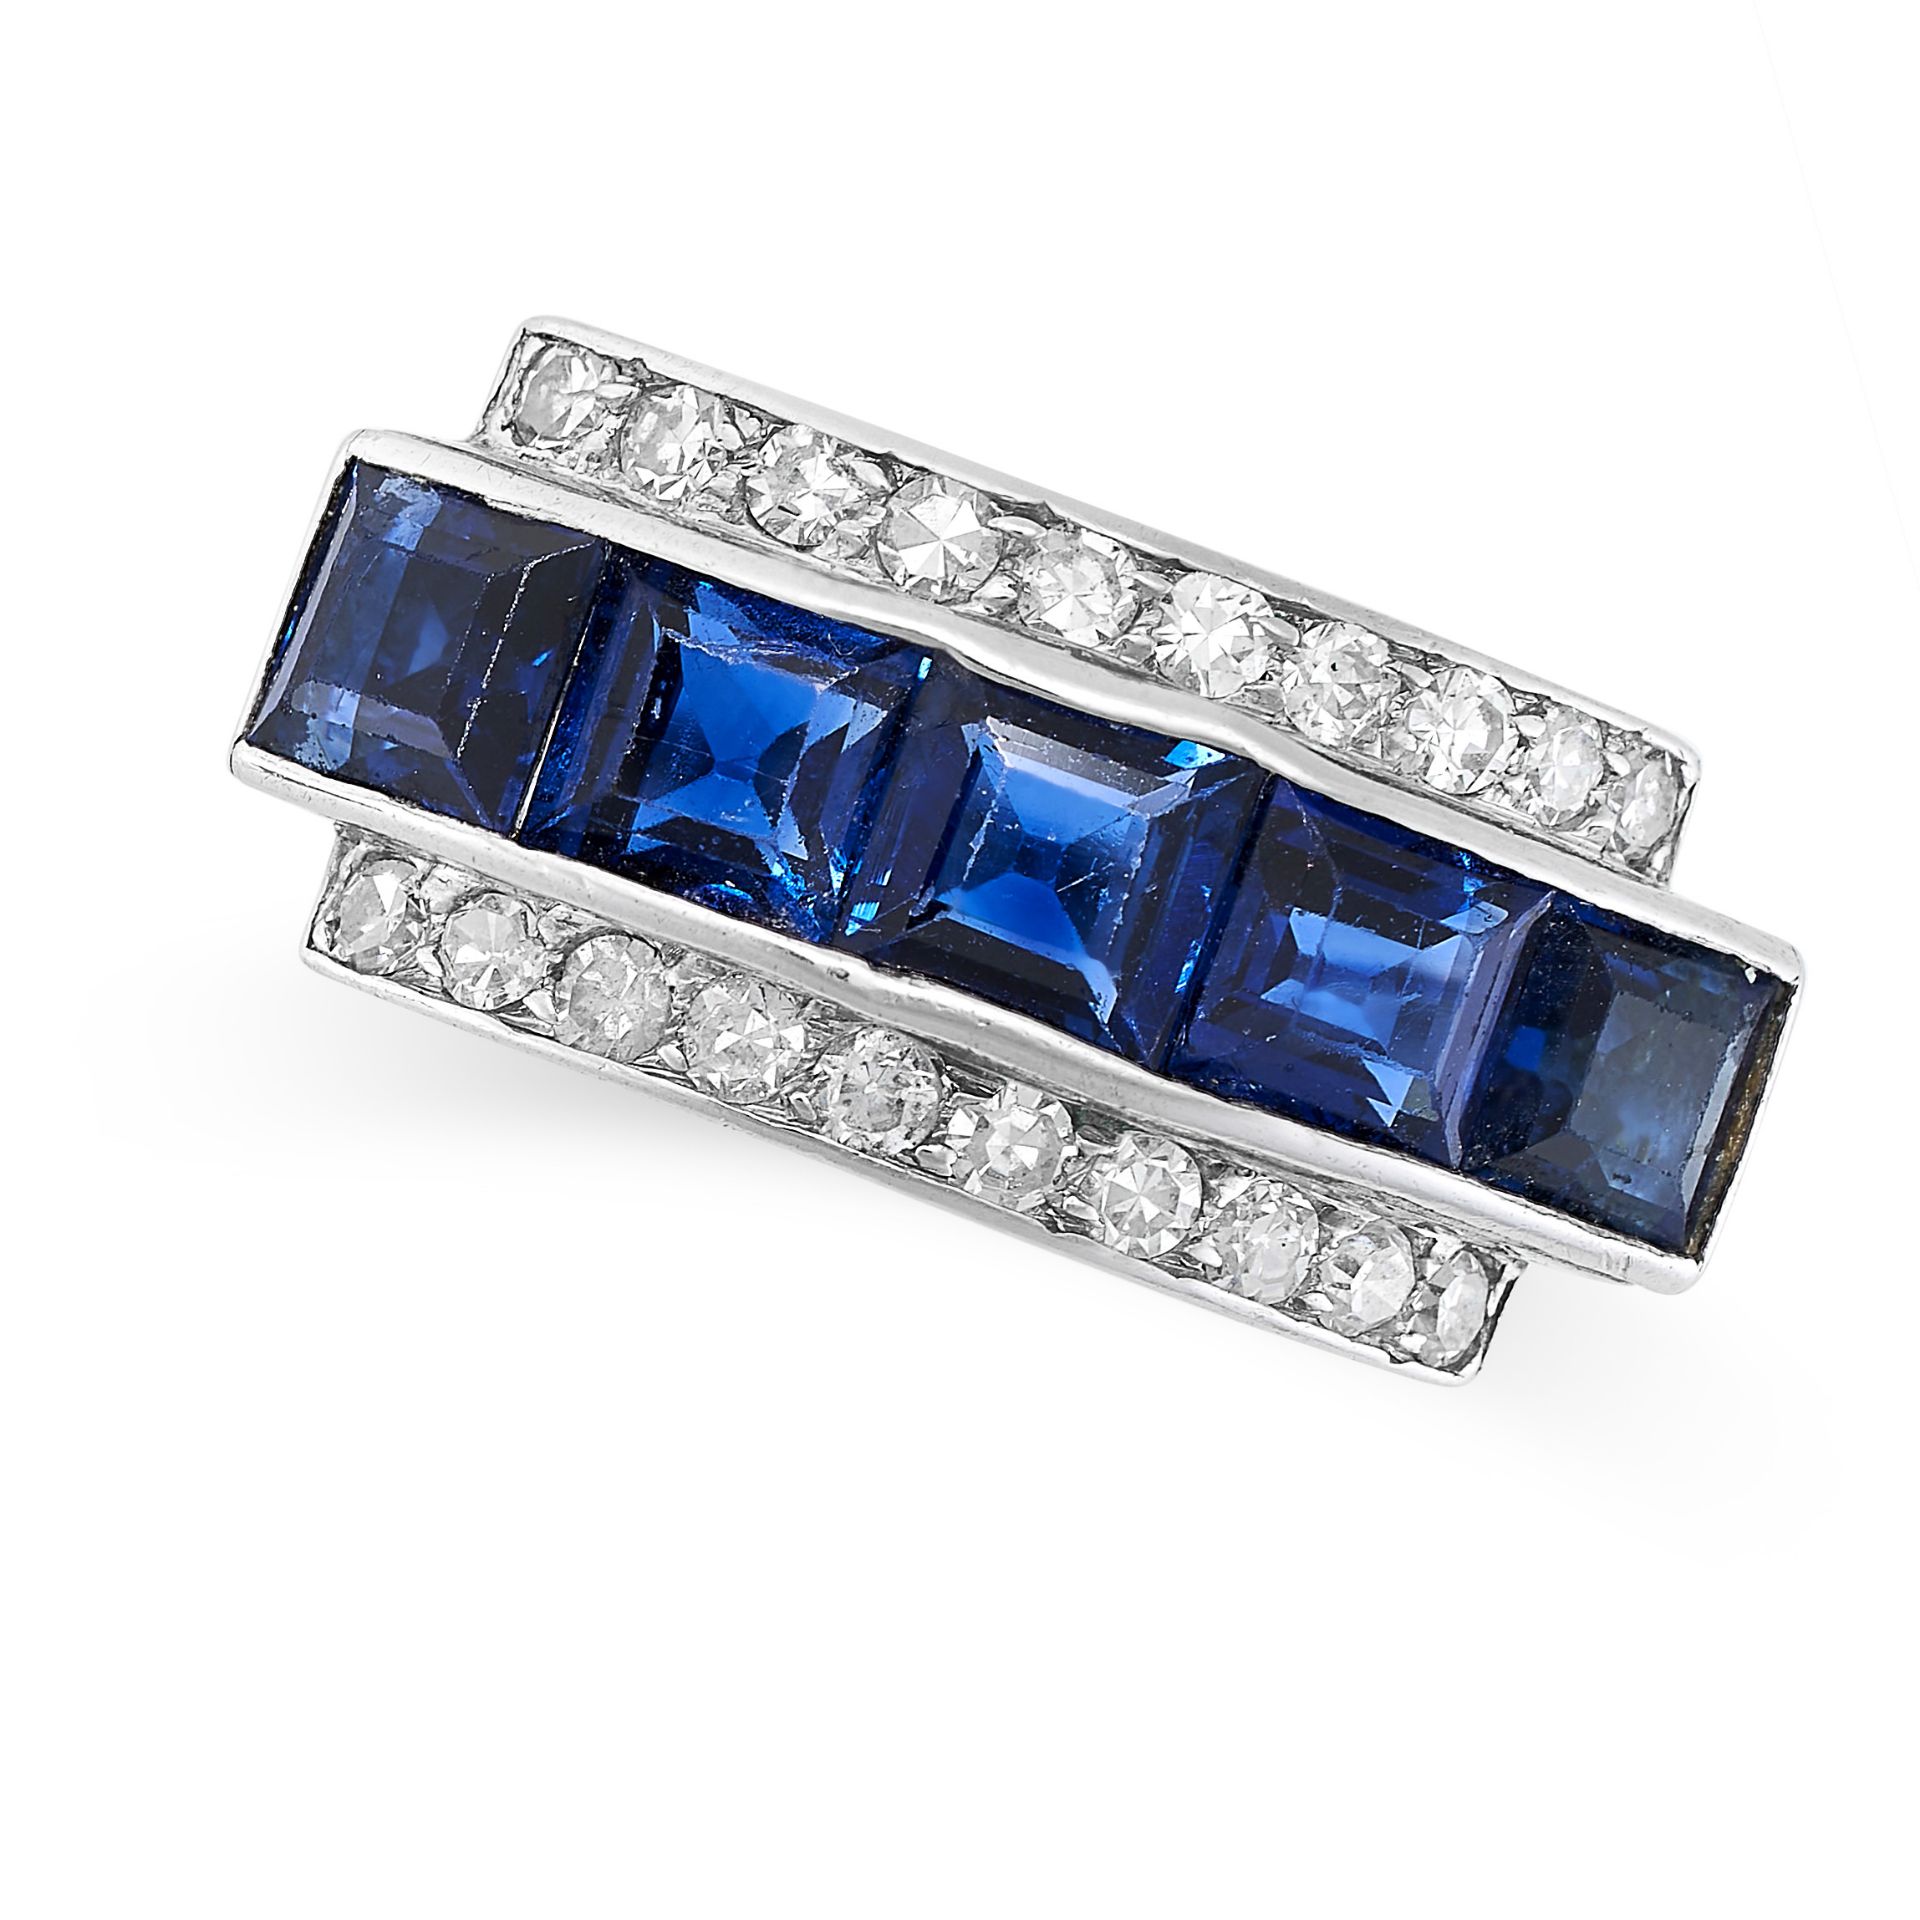 AN ART DECO SAPPHIRE AND DIAMOND RING set with a central panel of step cut sapphires between two